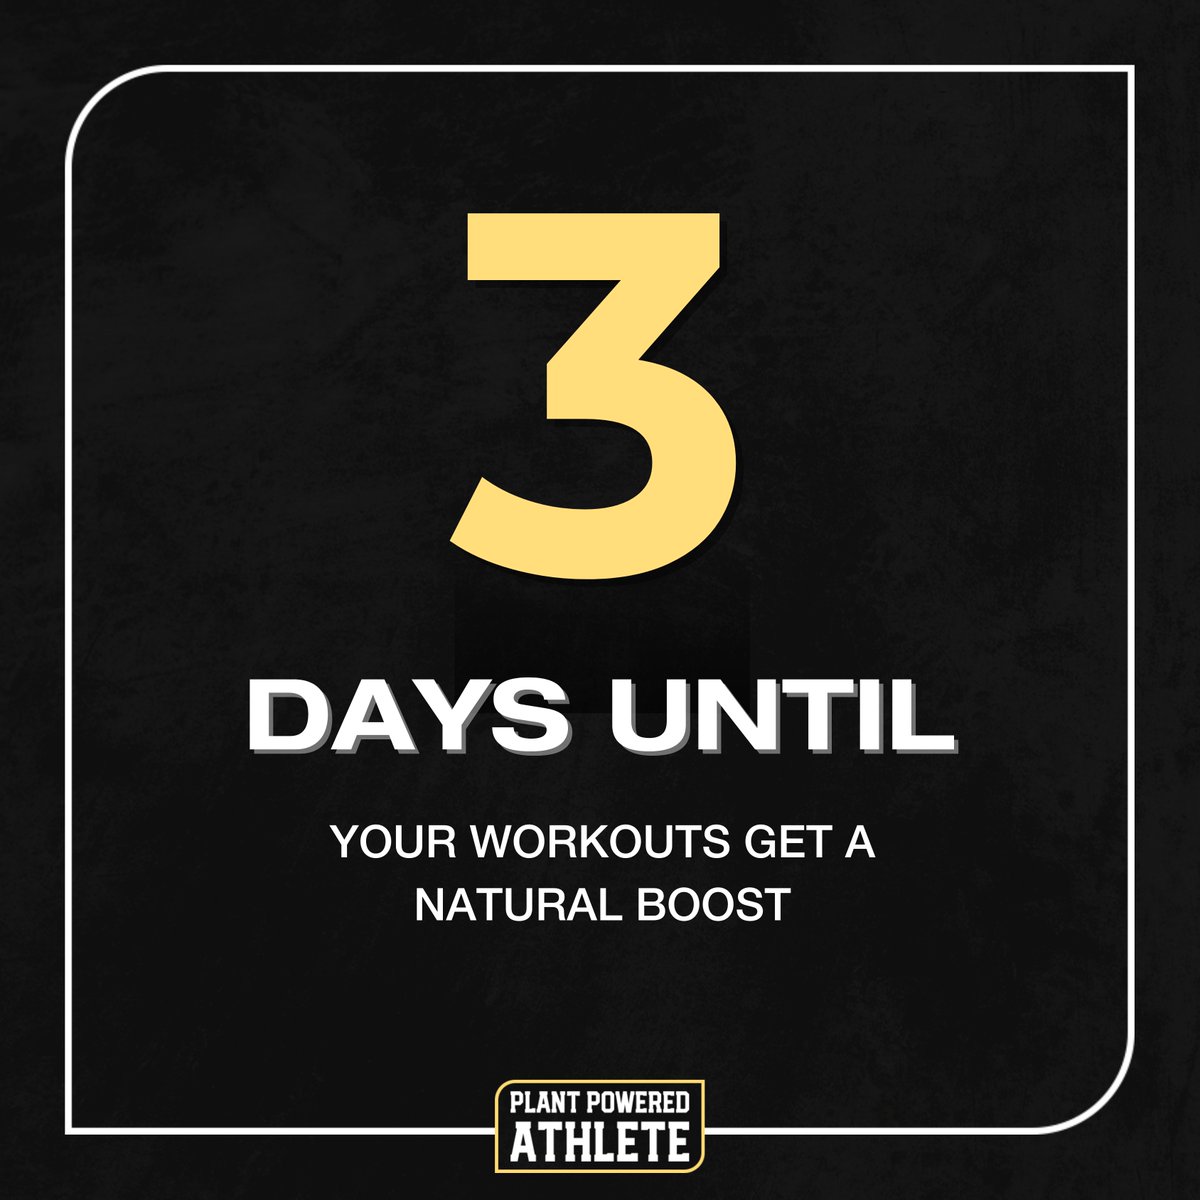 🌟 Just 3 Days Left - Are You Ready to Elevate Your Fitness? 🌱

Countdown with us as we're about to boost your workouts with the purest, most powerful plant-based innovation yet. 

Your fitness regime will never be the same!

#plantpoweredathlete #plantbasedprotein #plantbas...